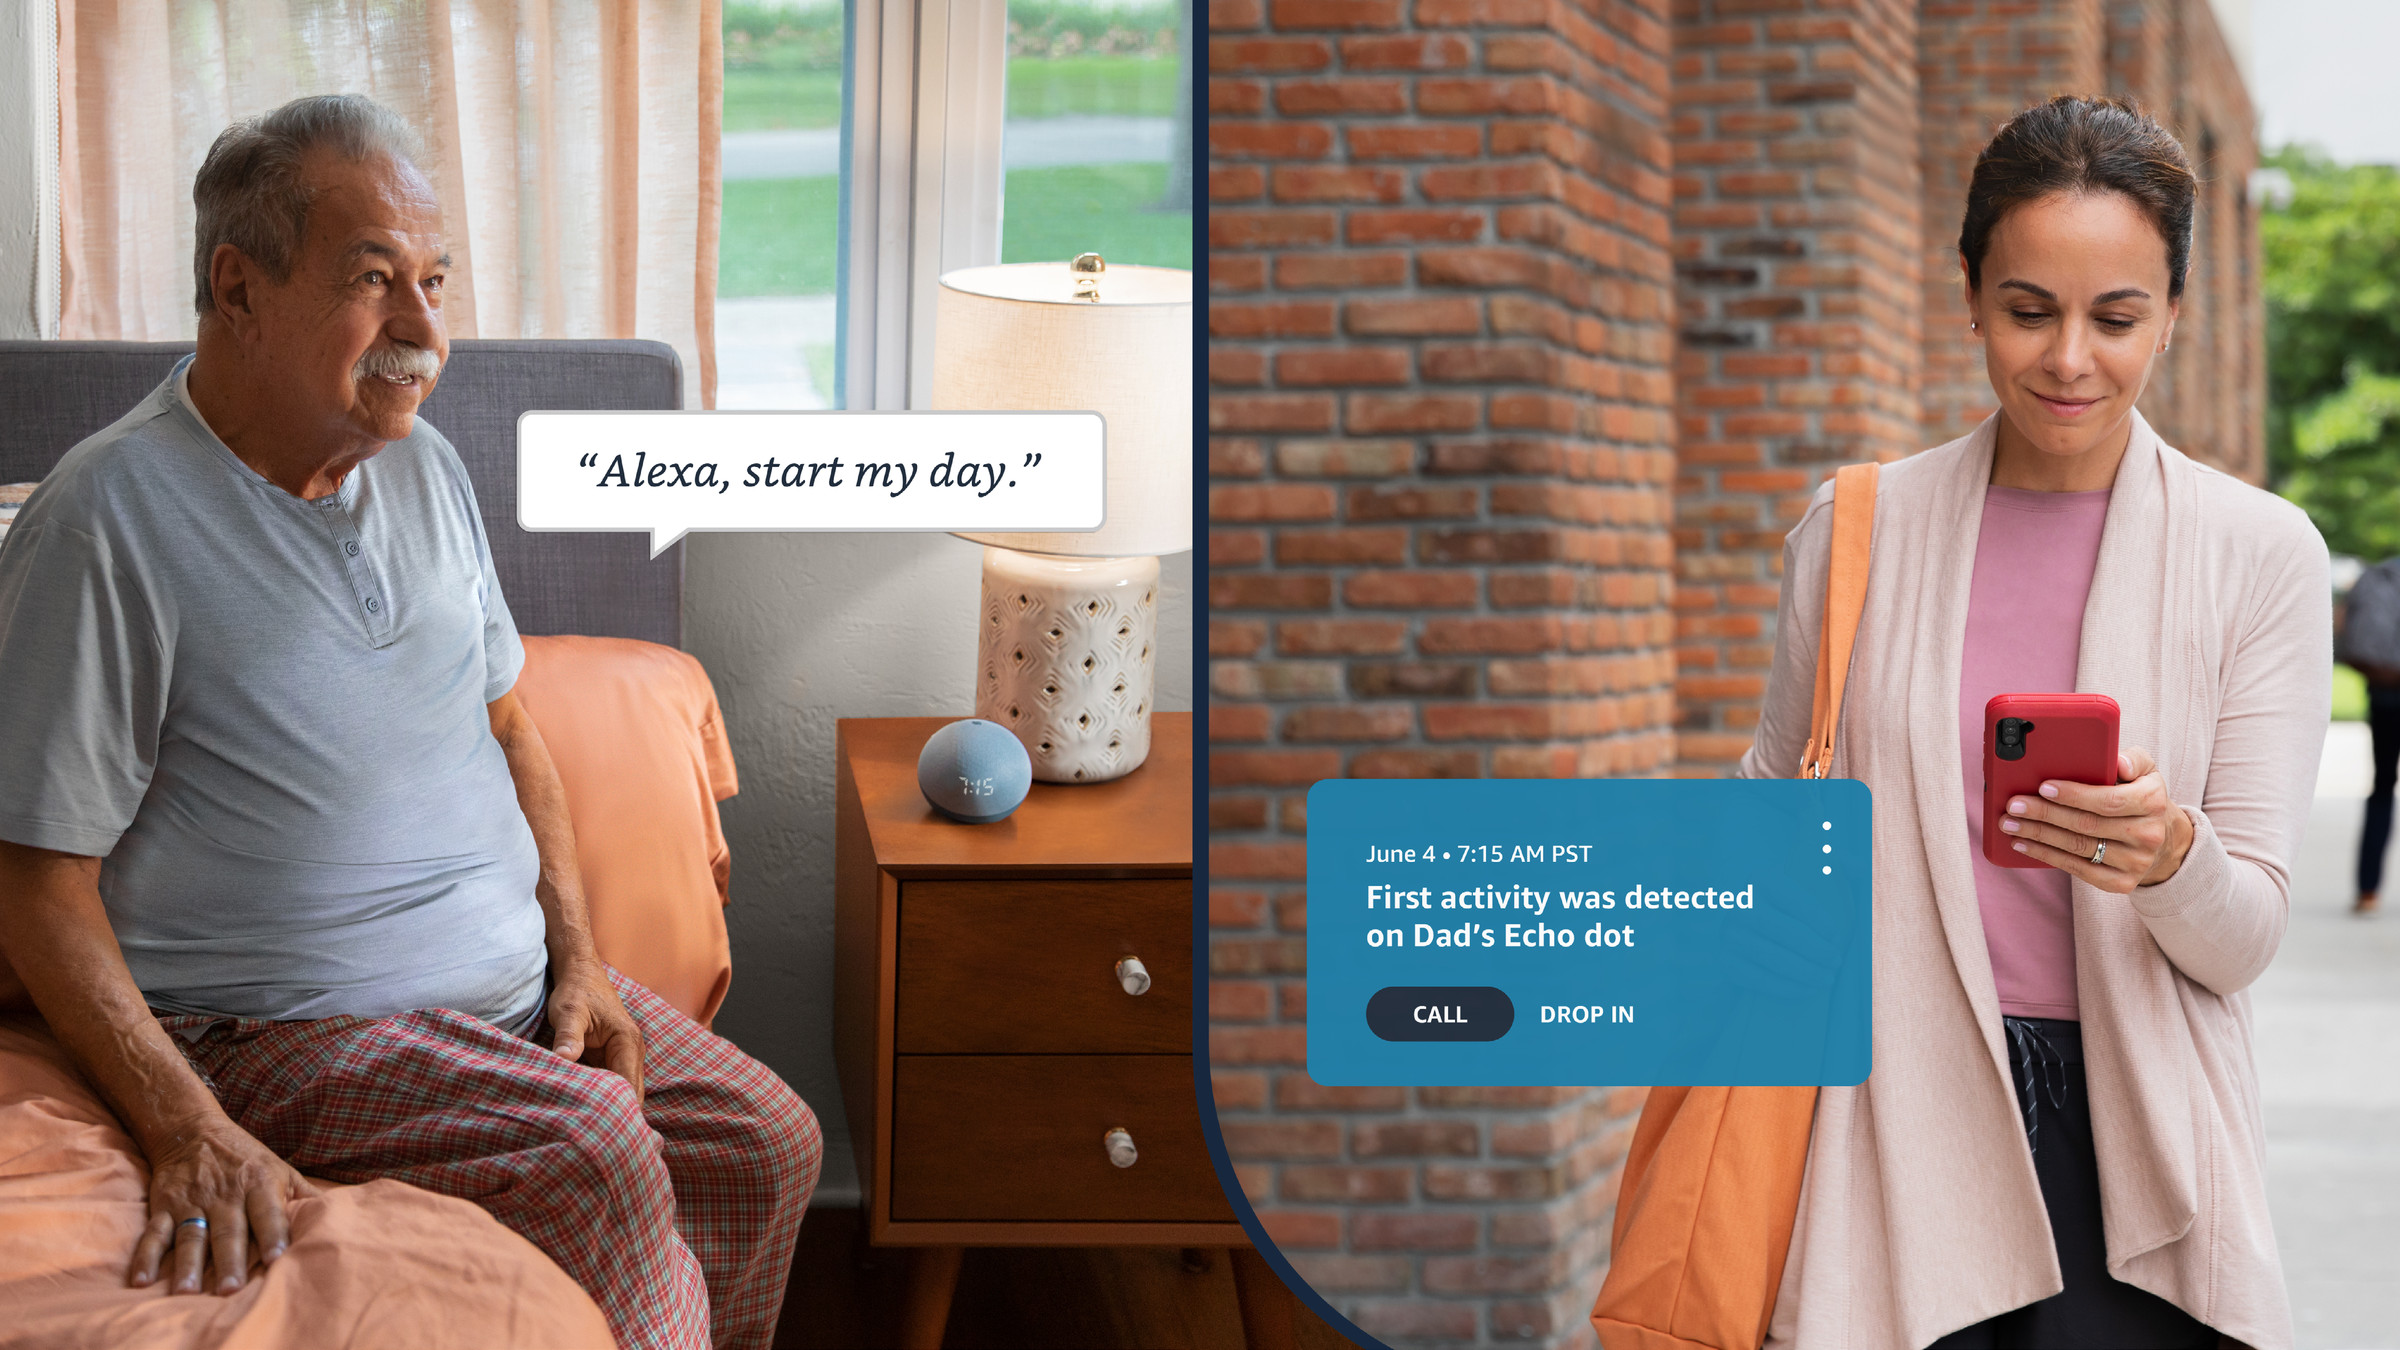 Alexa Together notifies caregivers about their loved ones’ activities.